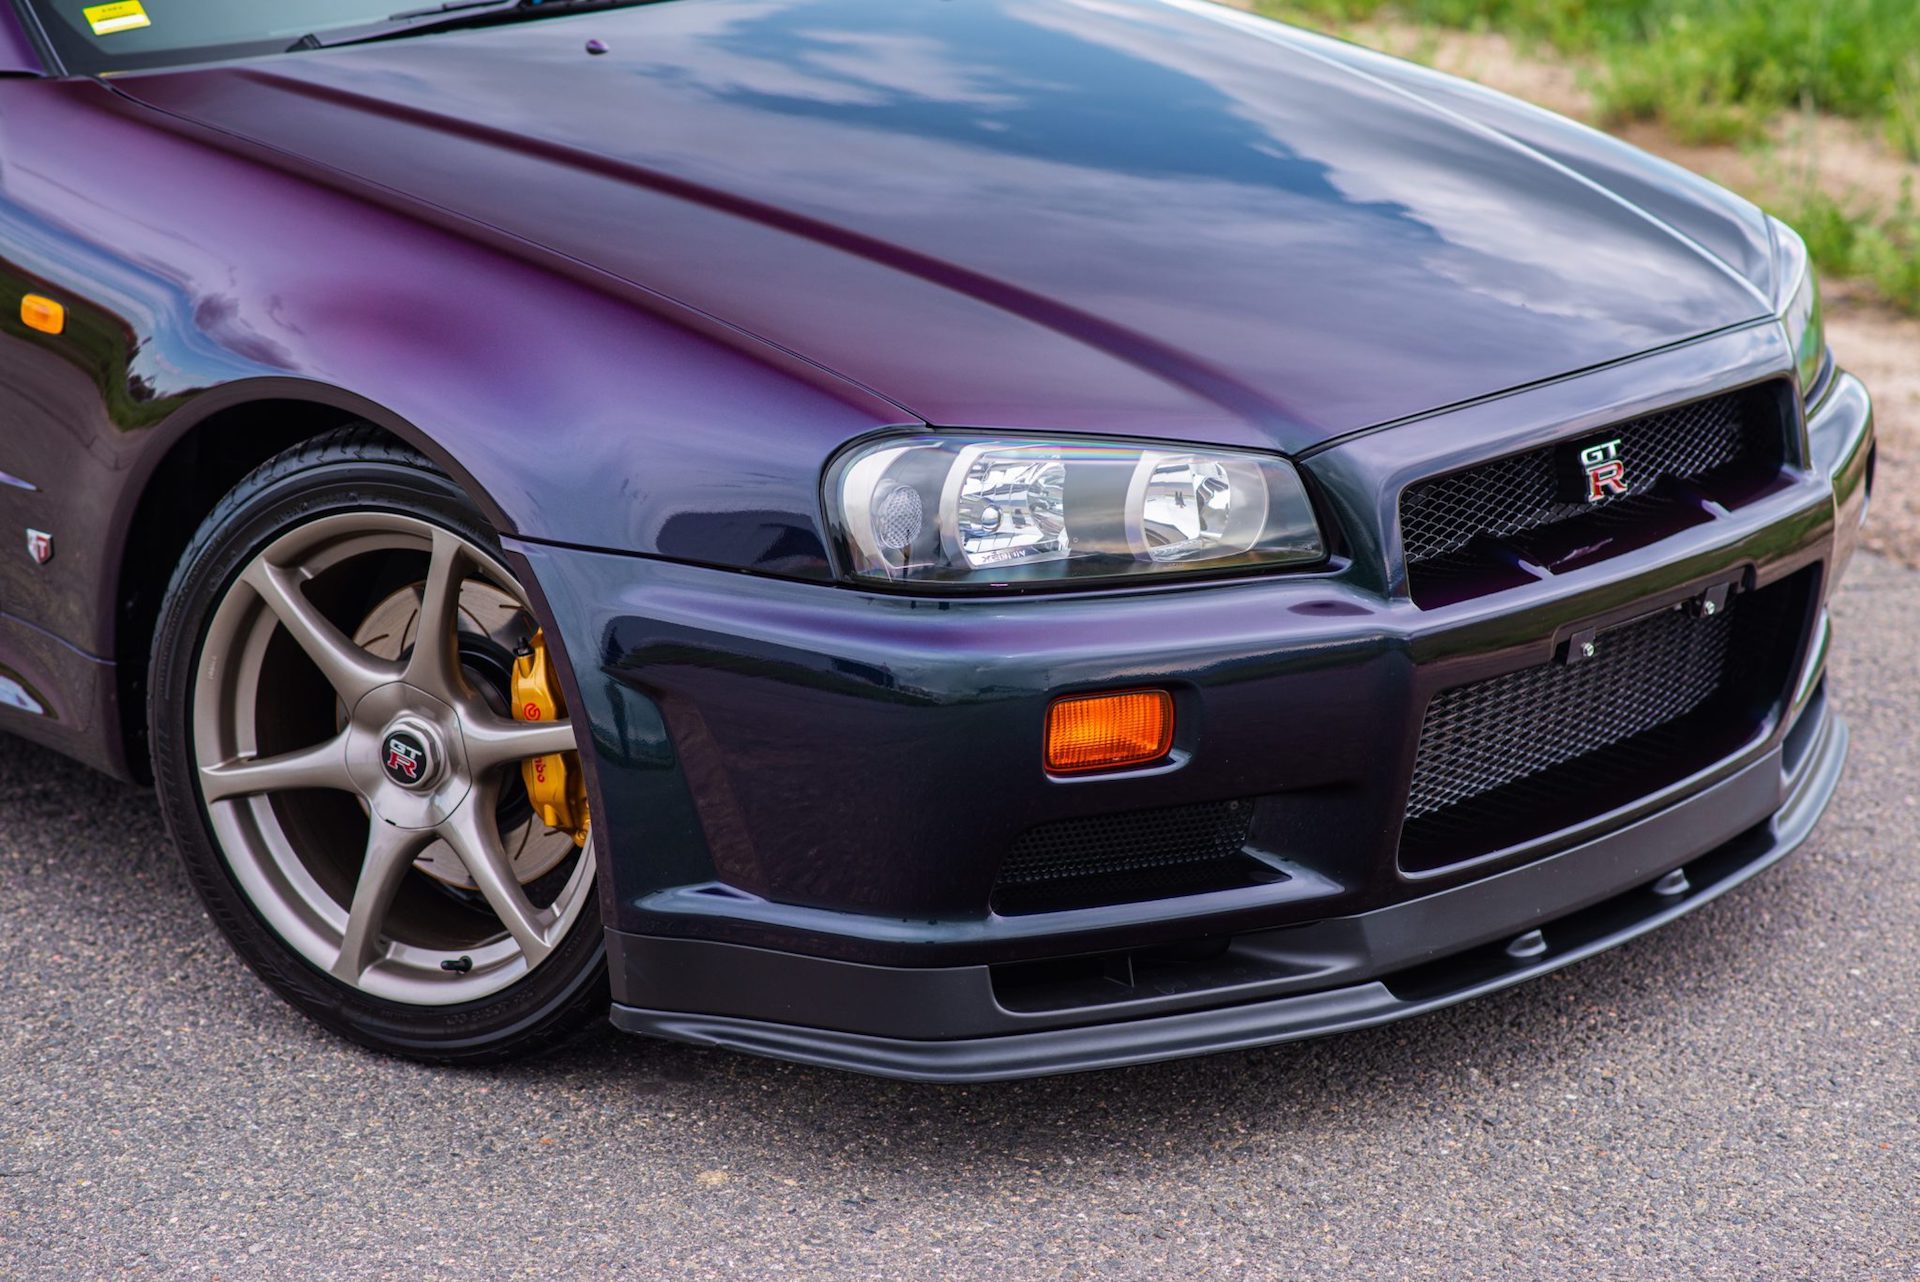 This Midnight Purple Ii 1999 Nissan Skyline Gt R Could Sell For 400k Carscoops